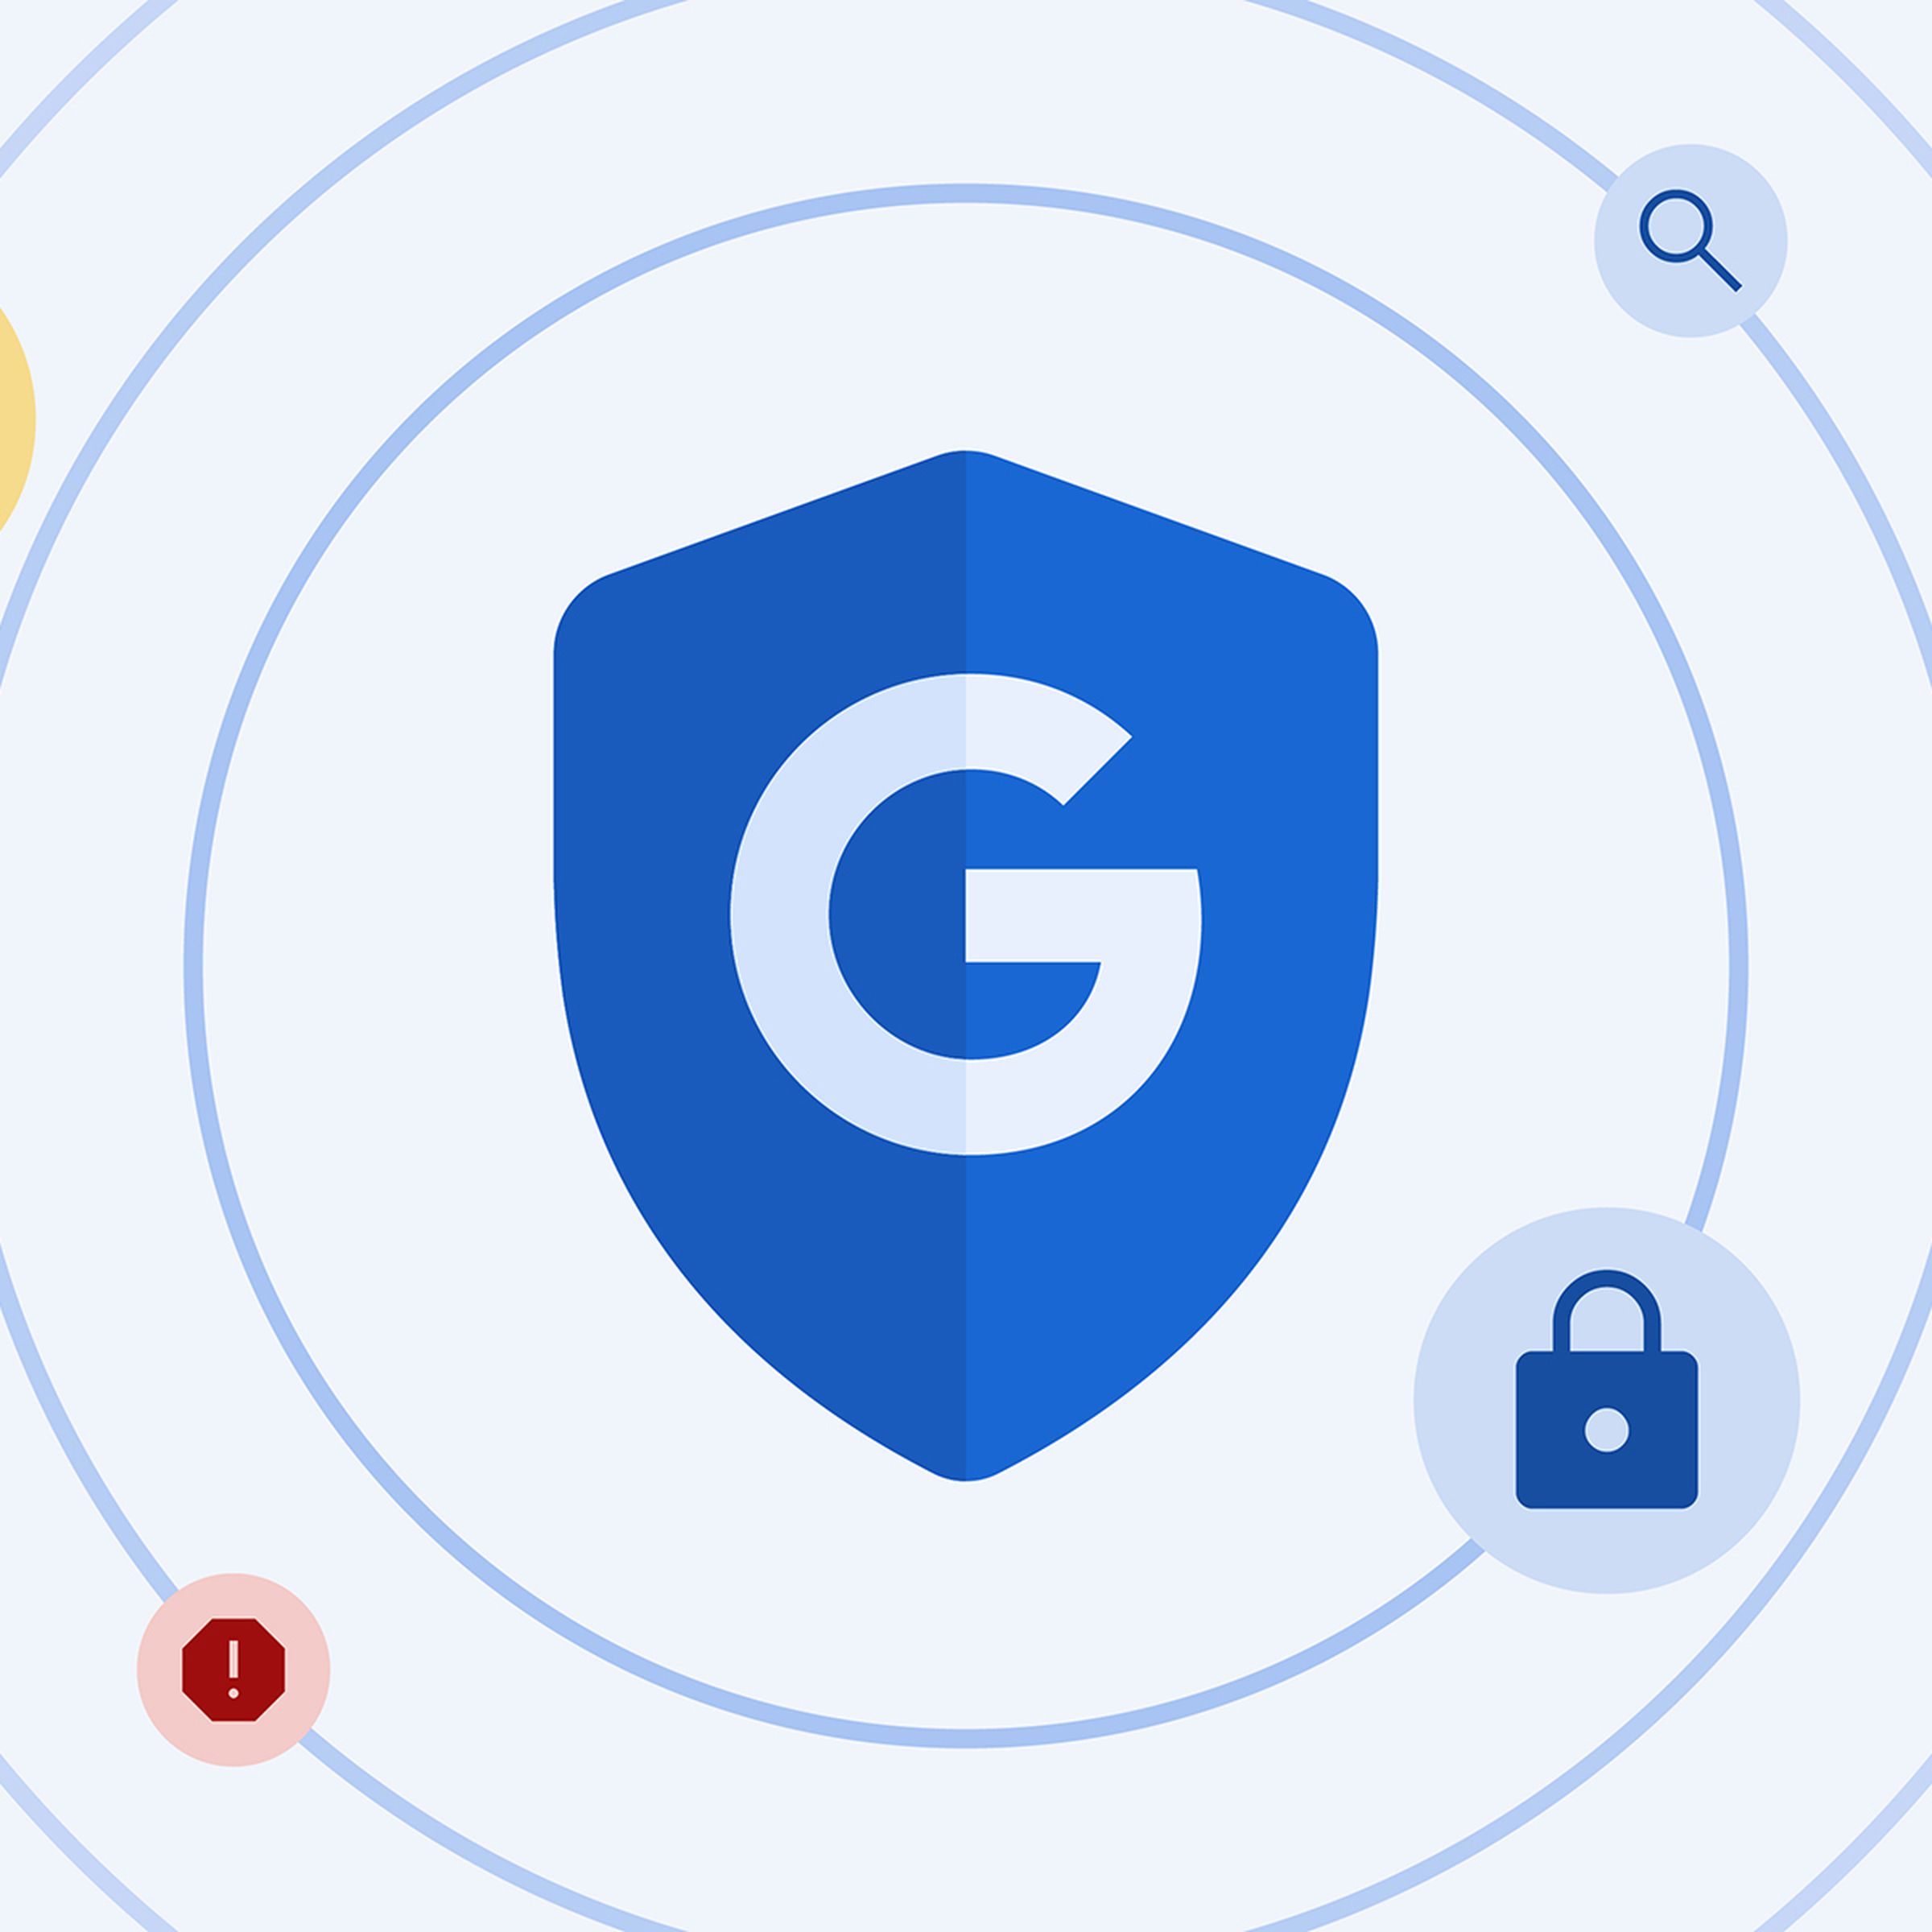 The Google logo in a shield, surrounded by security-themed illustrations.